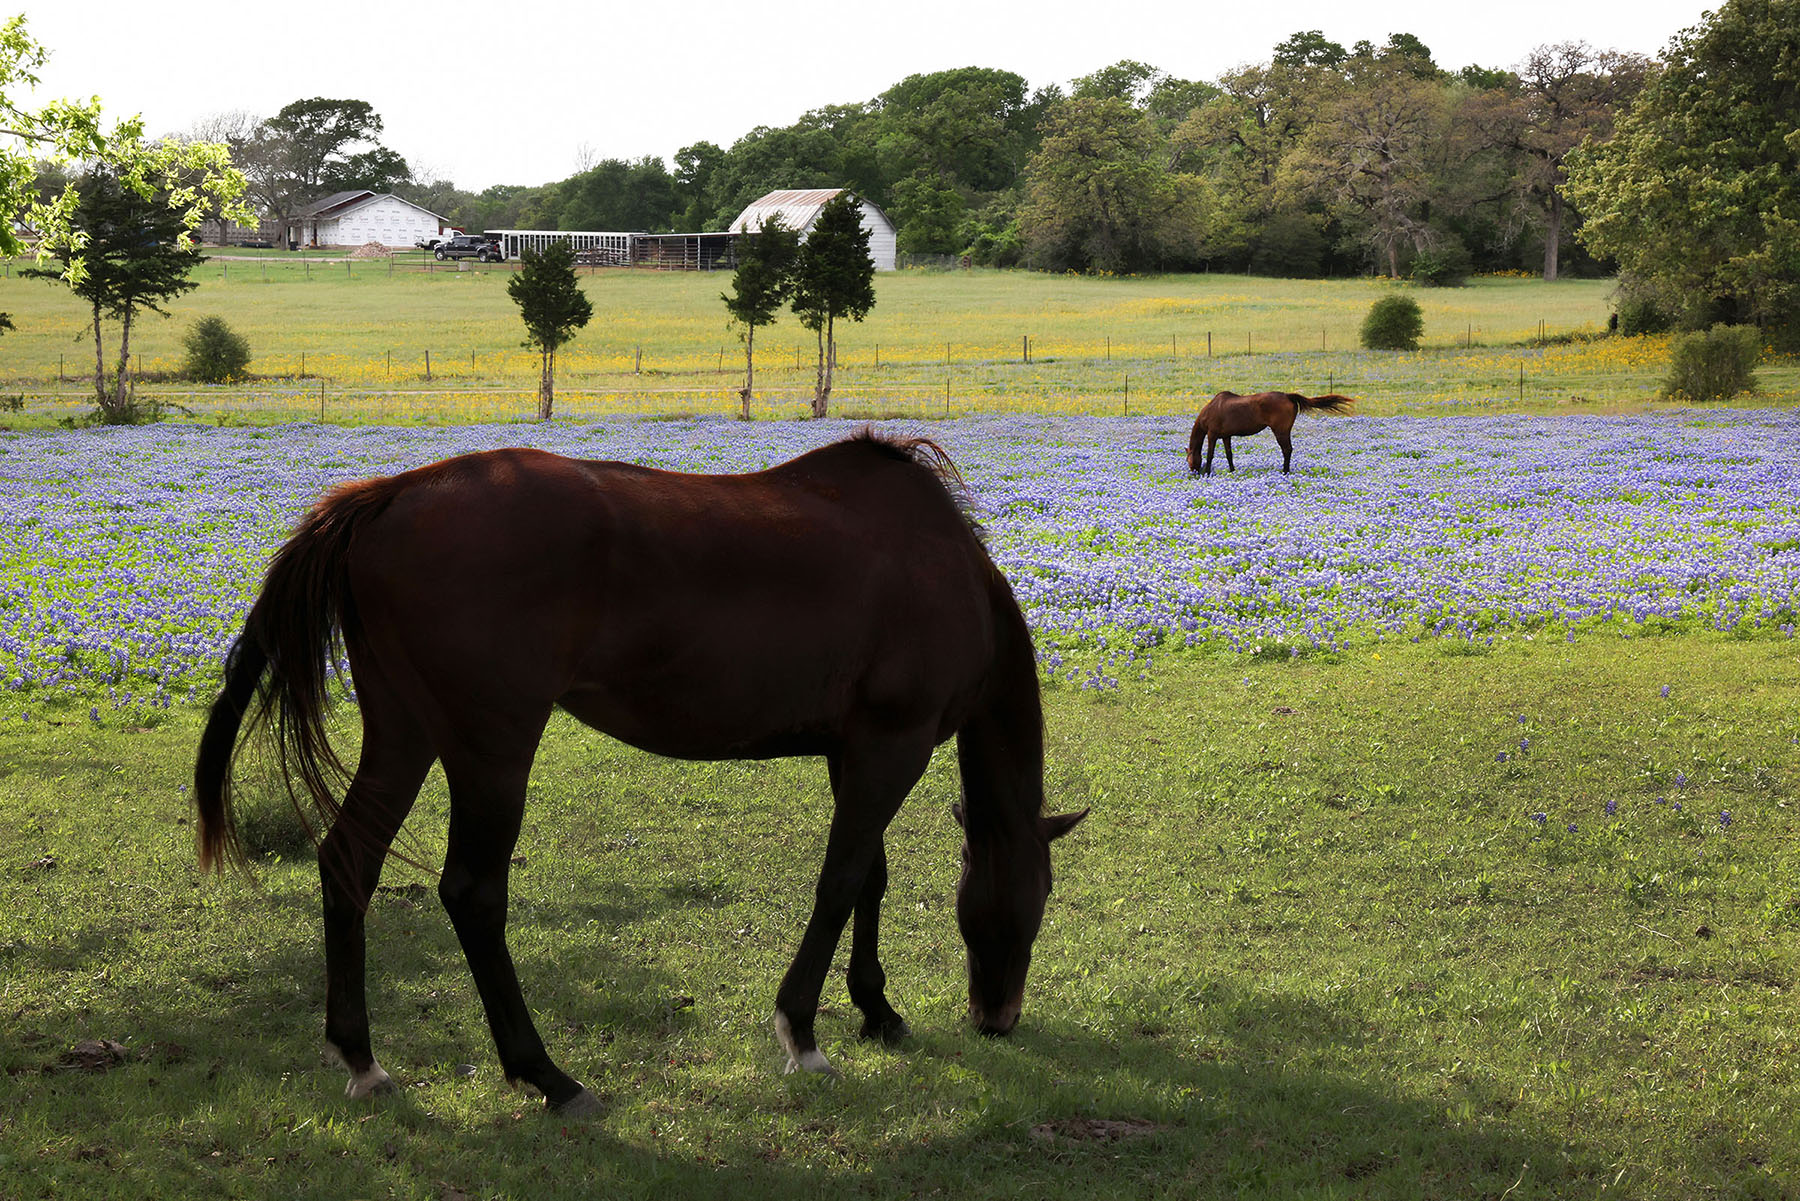 A horse grazes in a field of bluebonnets and green grass